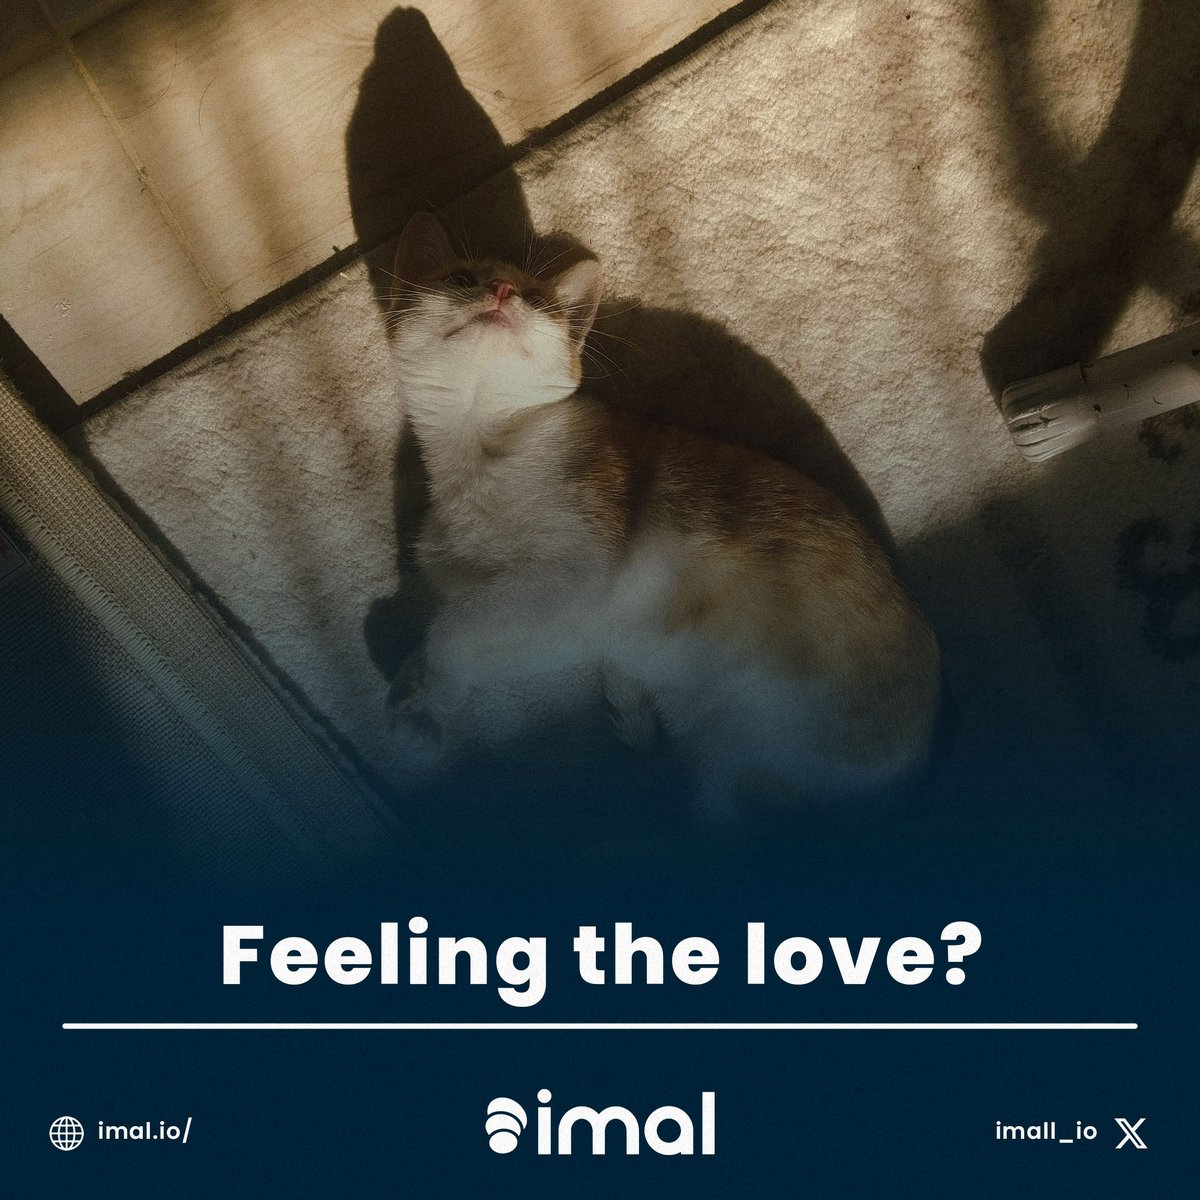 Sunshine, soft carpet naps, and maybe a little love? Make a difference with IMAL